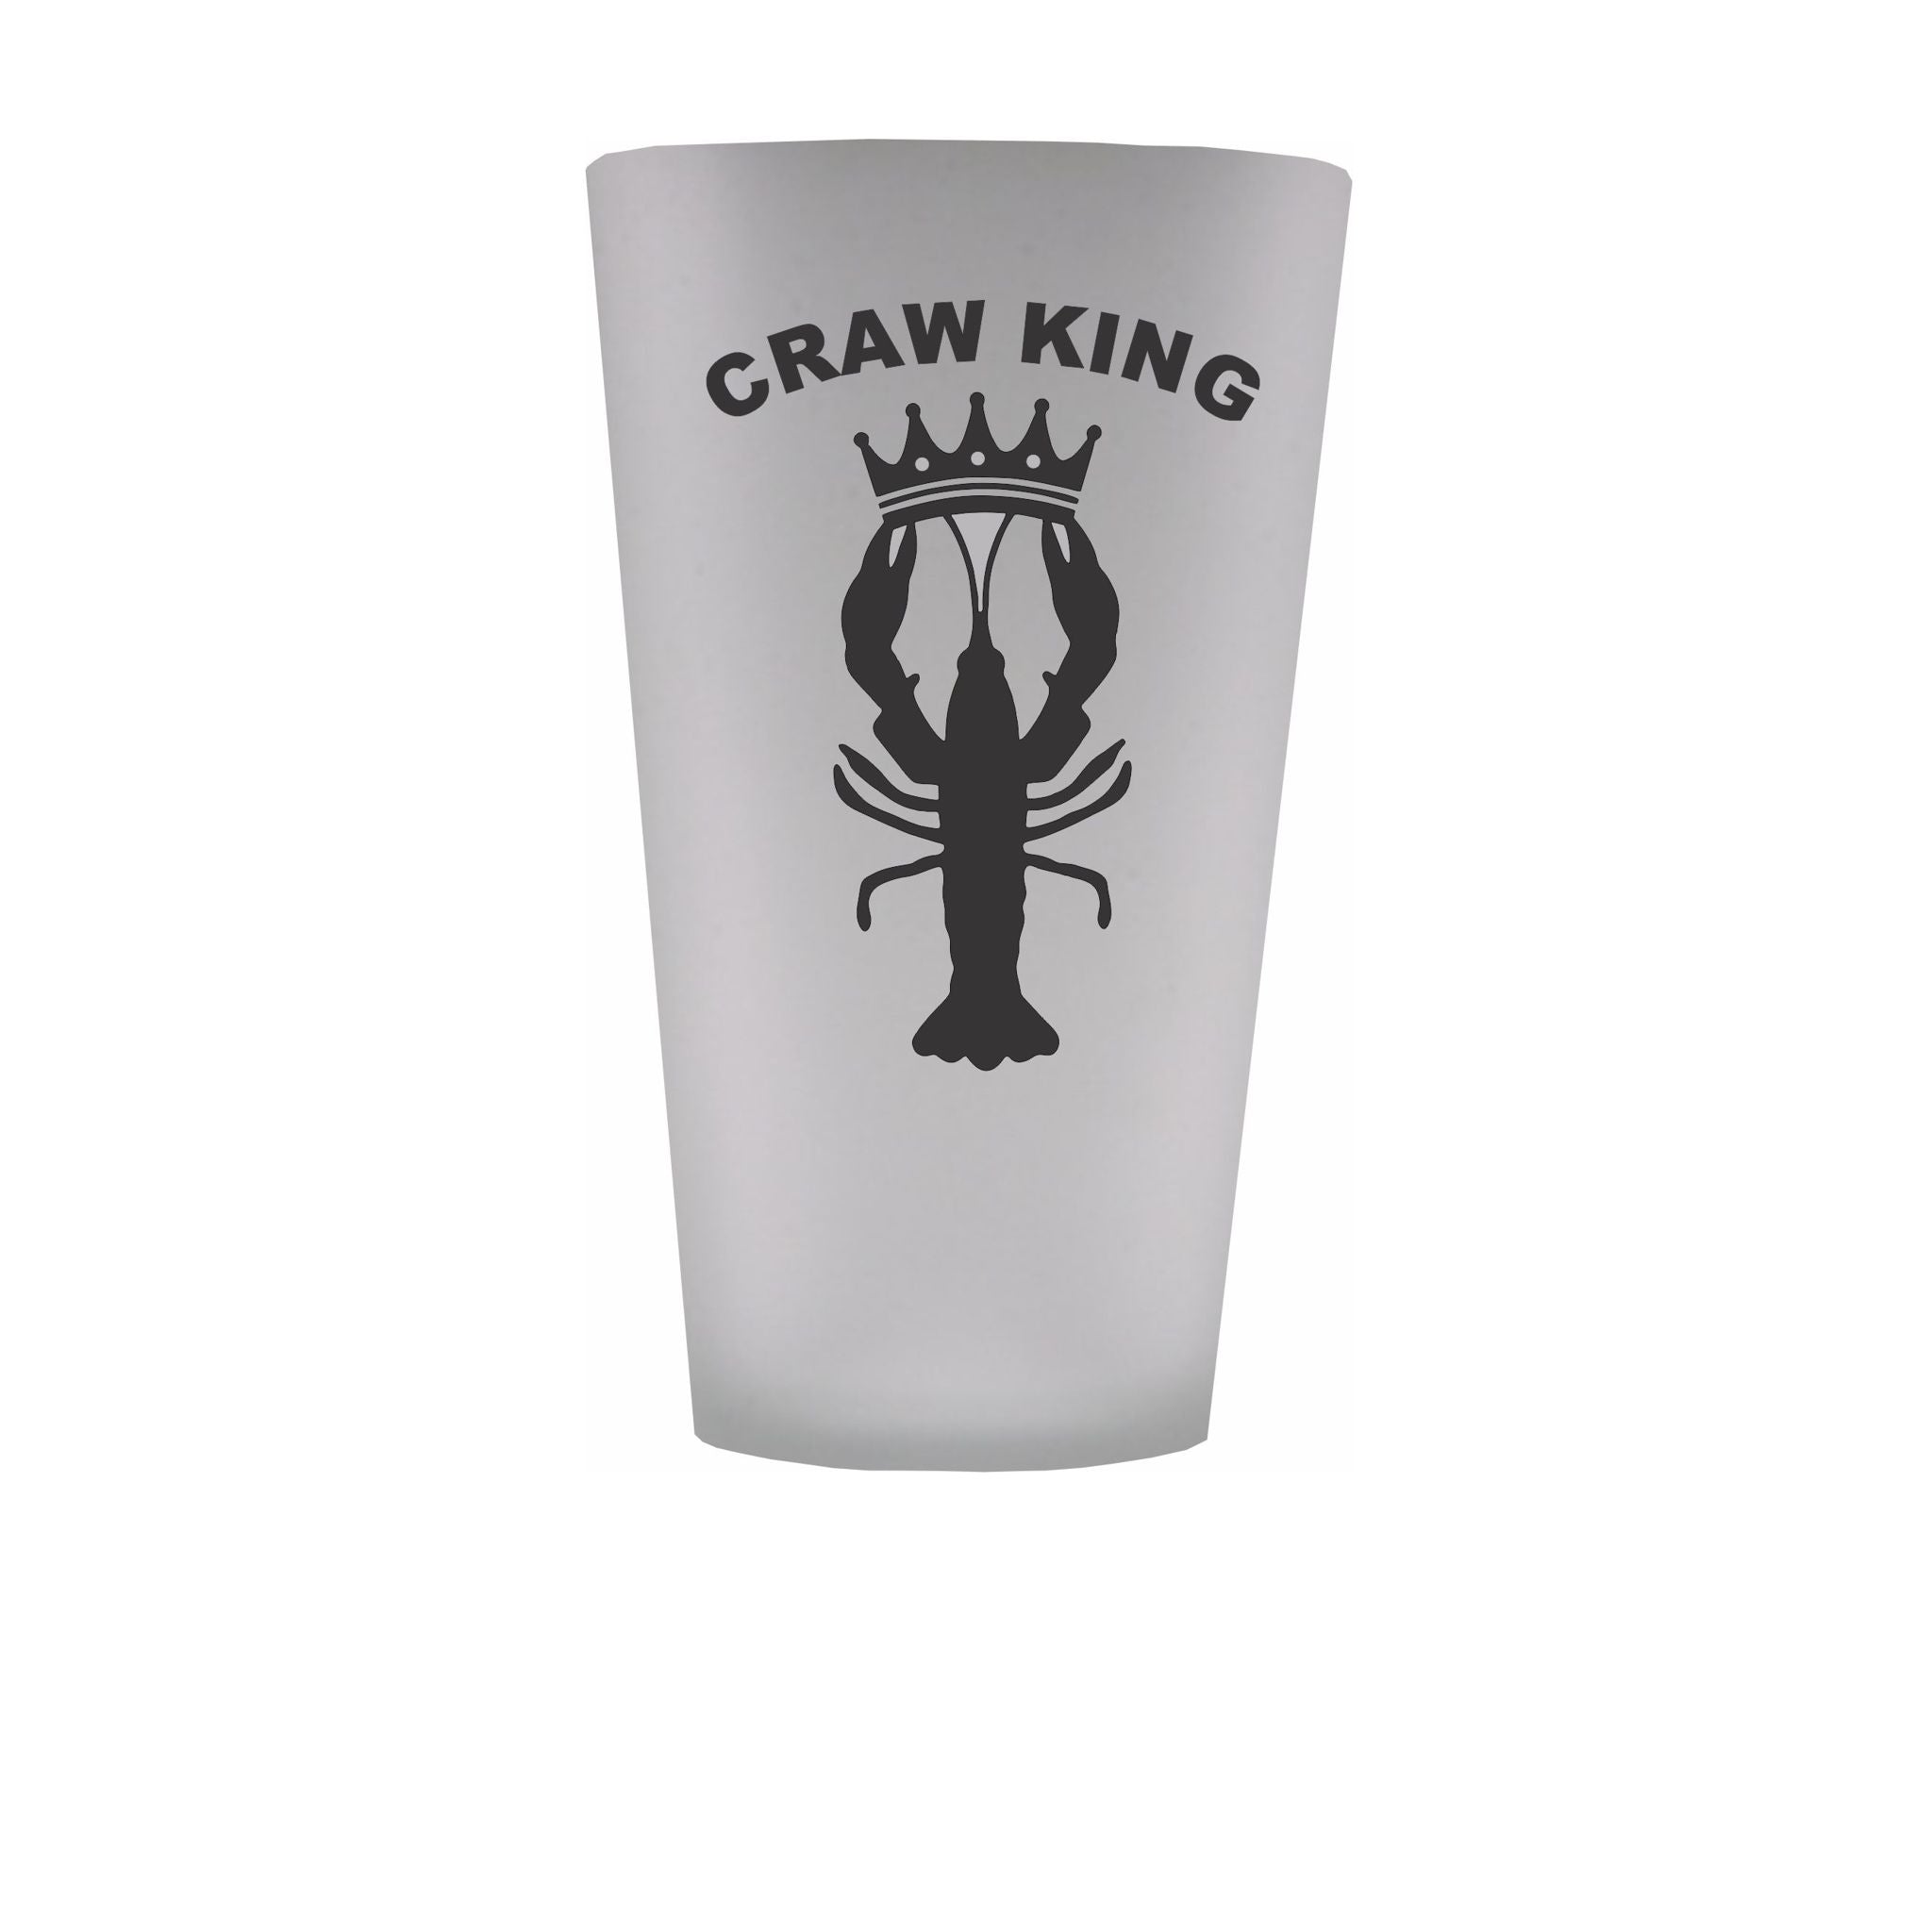 Craw King Pint Glass - Essential for Beer Enthusiasts